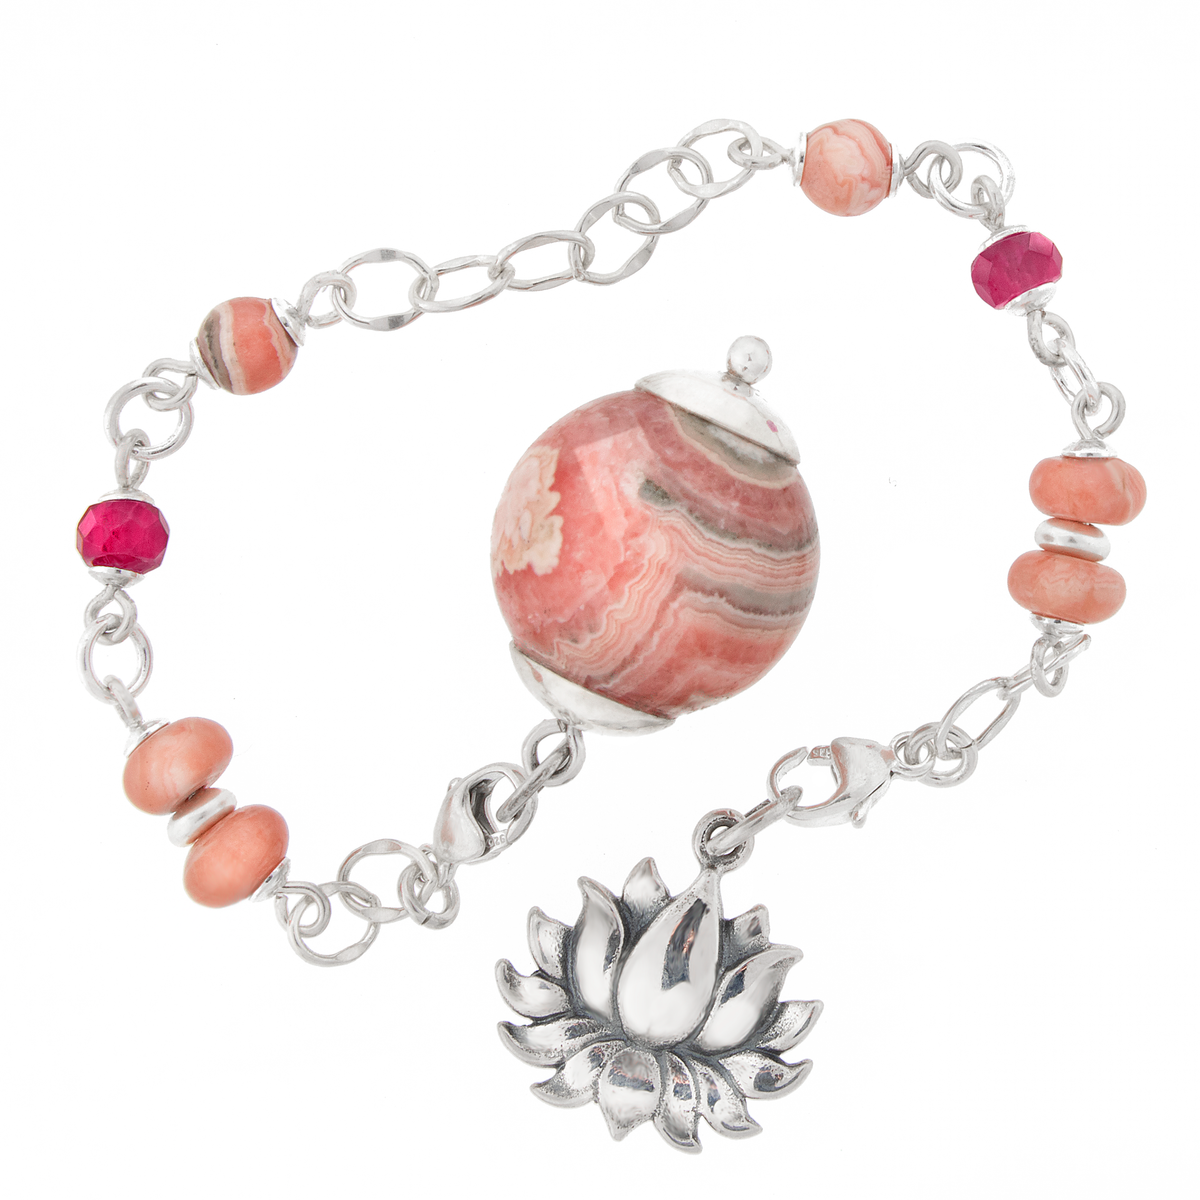 One of a Kind #398 - Rhodochrosite, Ruby and Sterling Silver Pendulum by Ask Your Pendulum